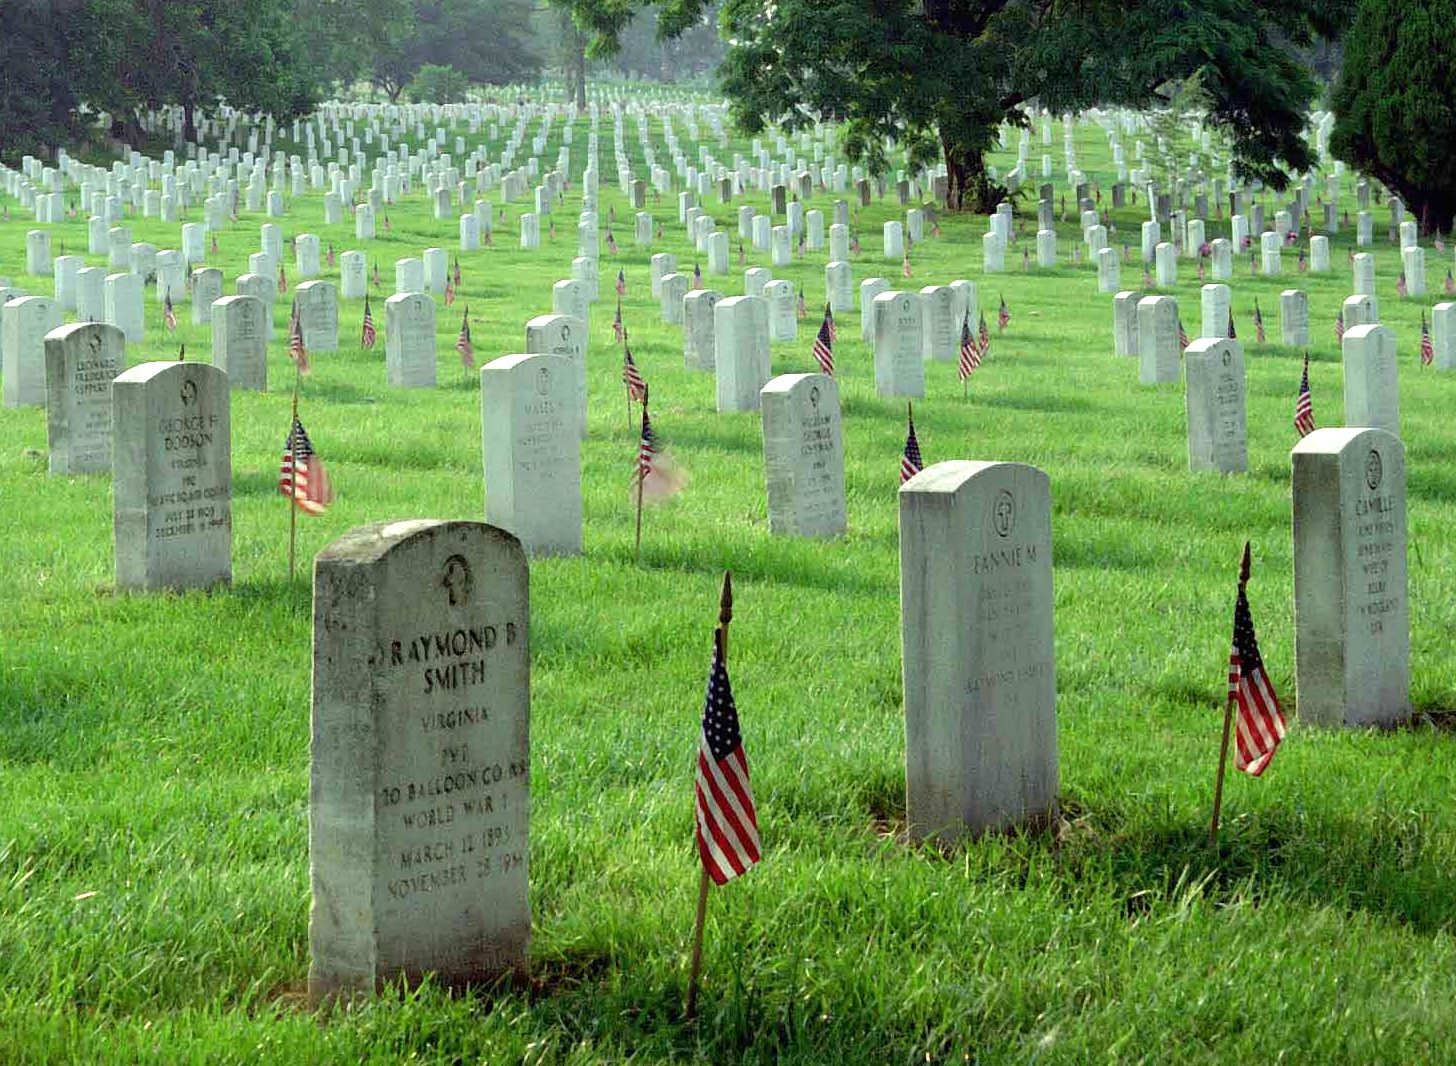 photograph of a graveyard that stretches into the horizon of the photograph on a grassy hill - the graves all have US flags placed at them